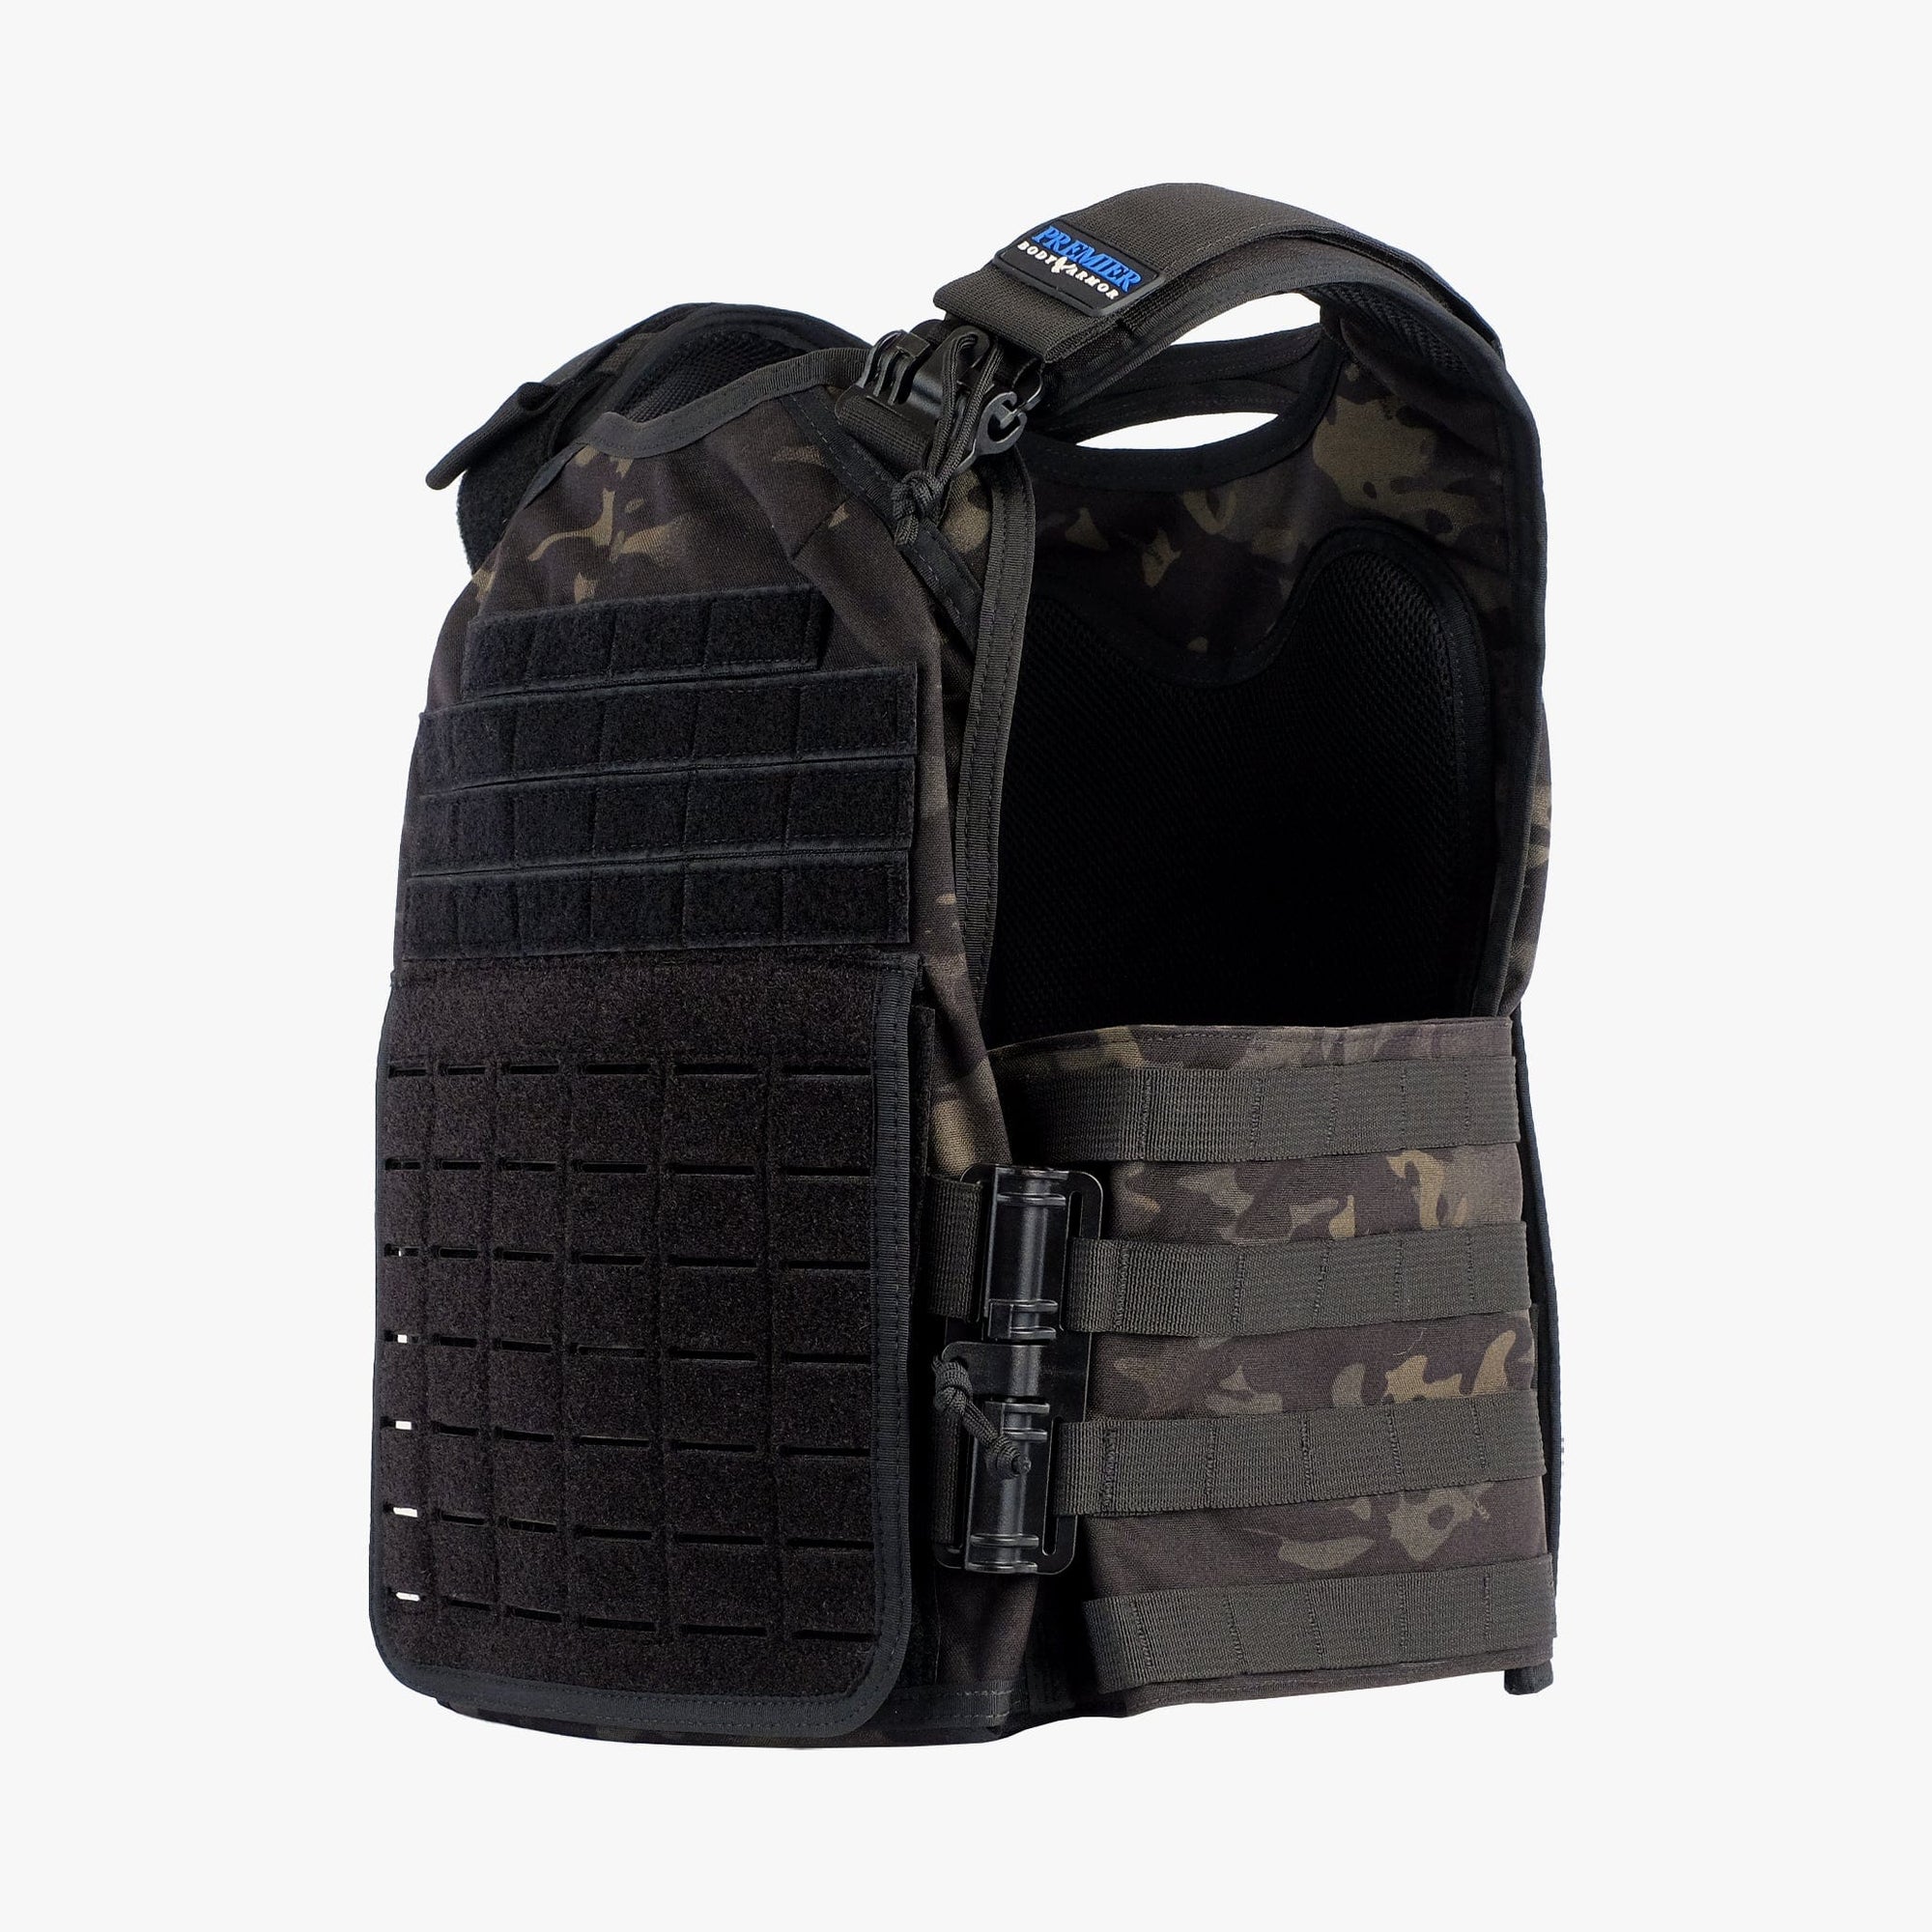 This multicam black plate carrier can hold any type of rifle rated body armor. Pair this vest with our STRATIS polyethylene body armor plates to have the best bulletproof plate carrier on the market.